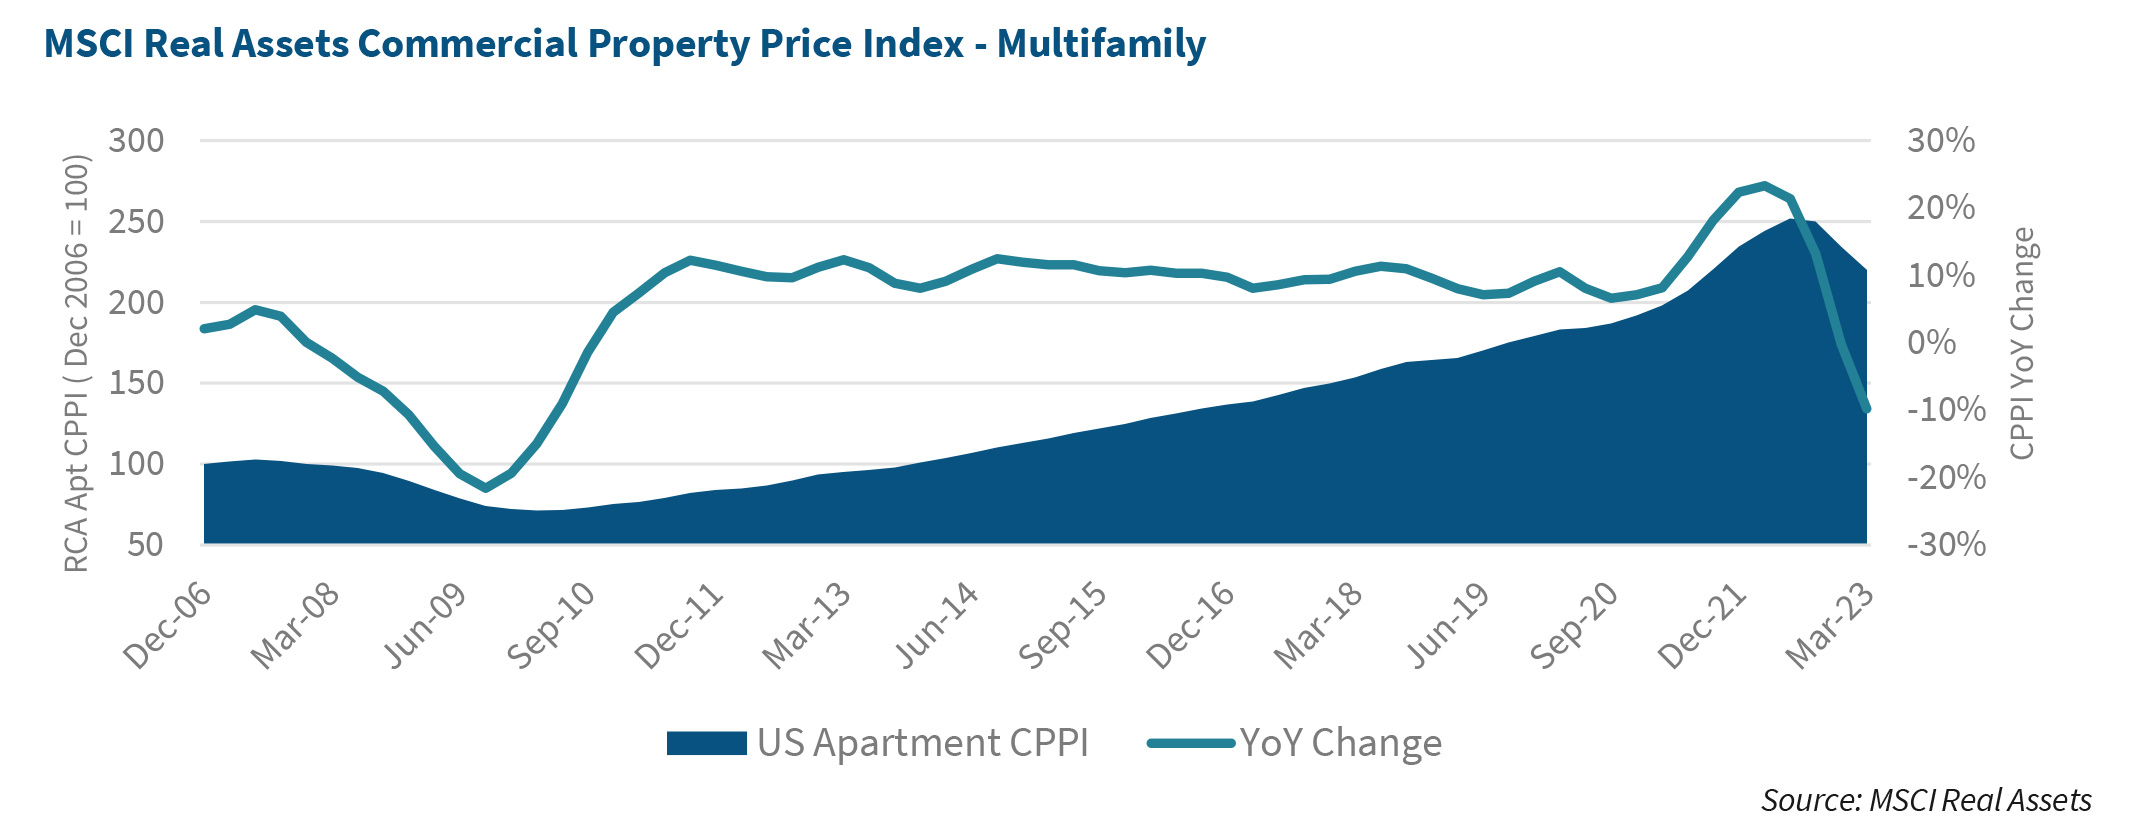 MSCI Real Assets Commercial Property Price Index - Multifamily